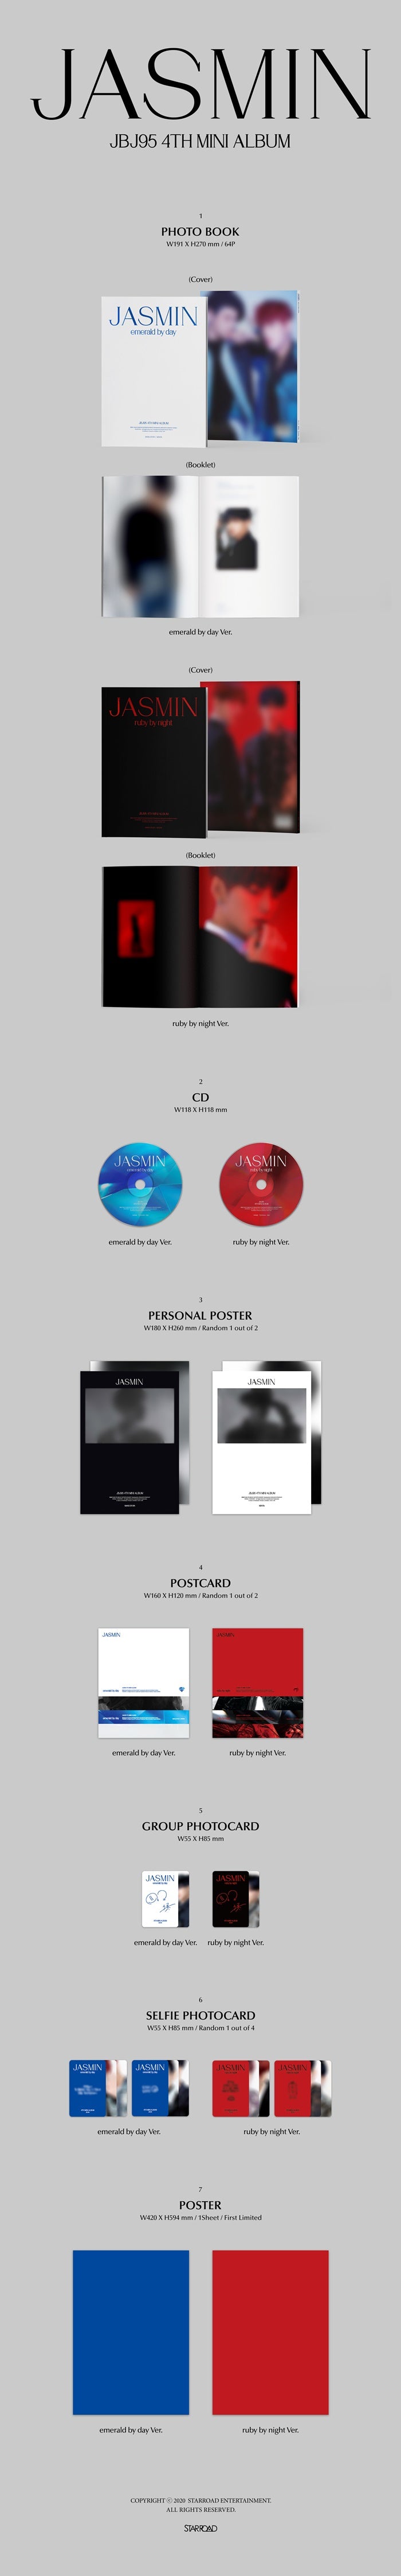 1 CD
1 Mini Poster On Pack
1 Booklet (72 pages)
1 Post
1 Photo Card
1 Group Card